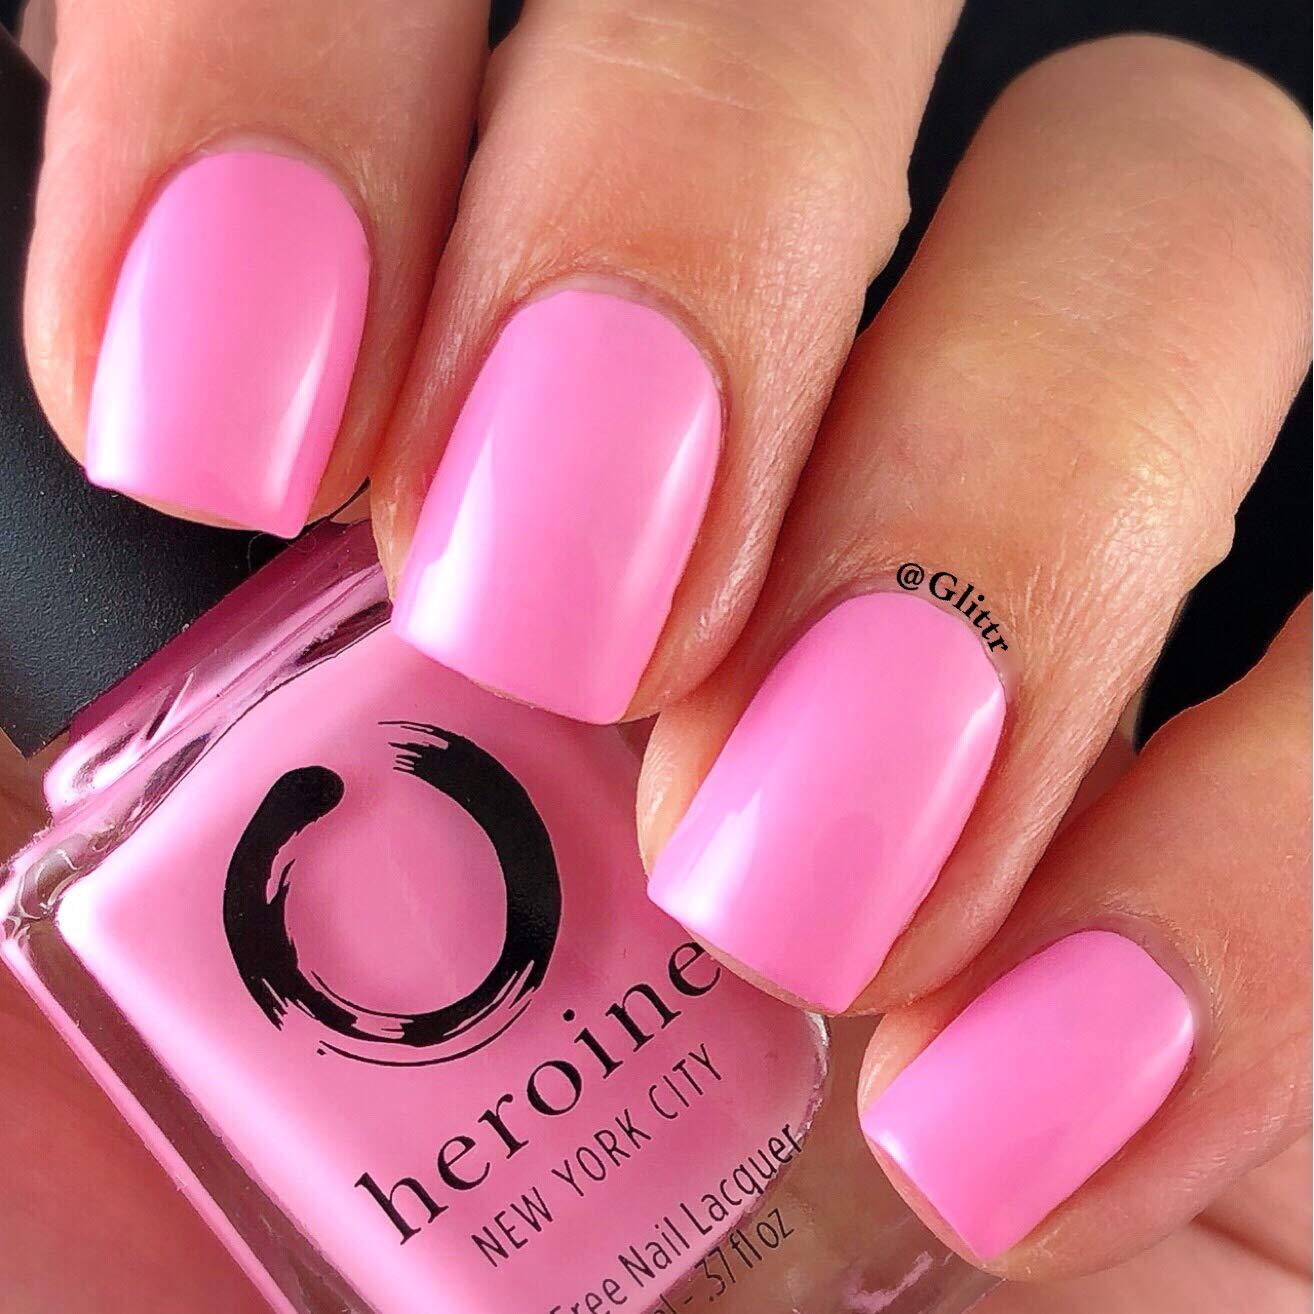 Pastel tip nails: 10 ideas to inspire you this spring | HELLO!